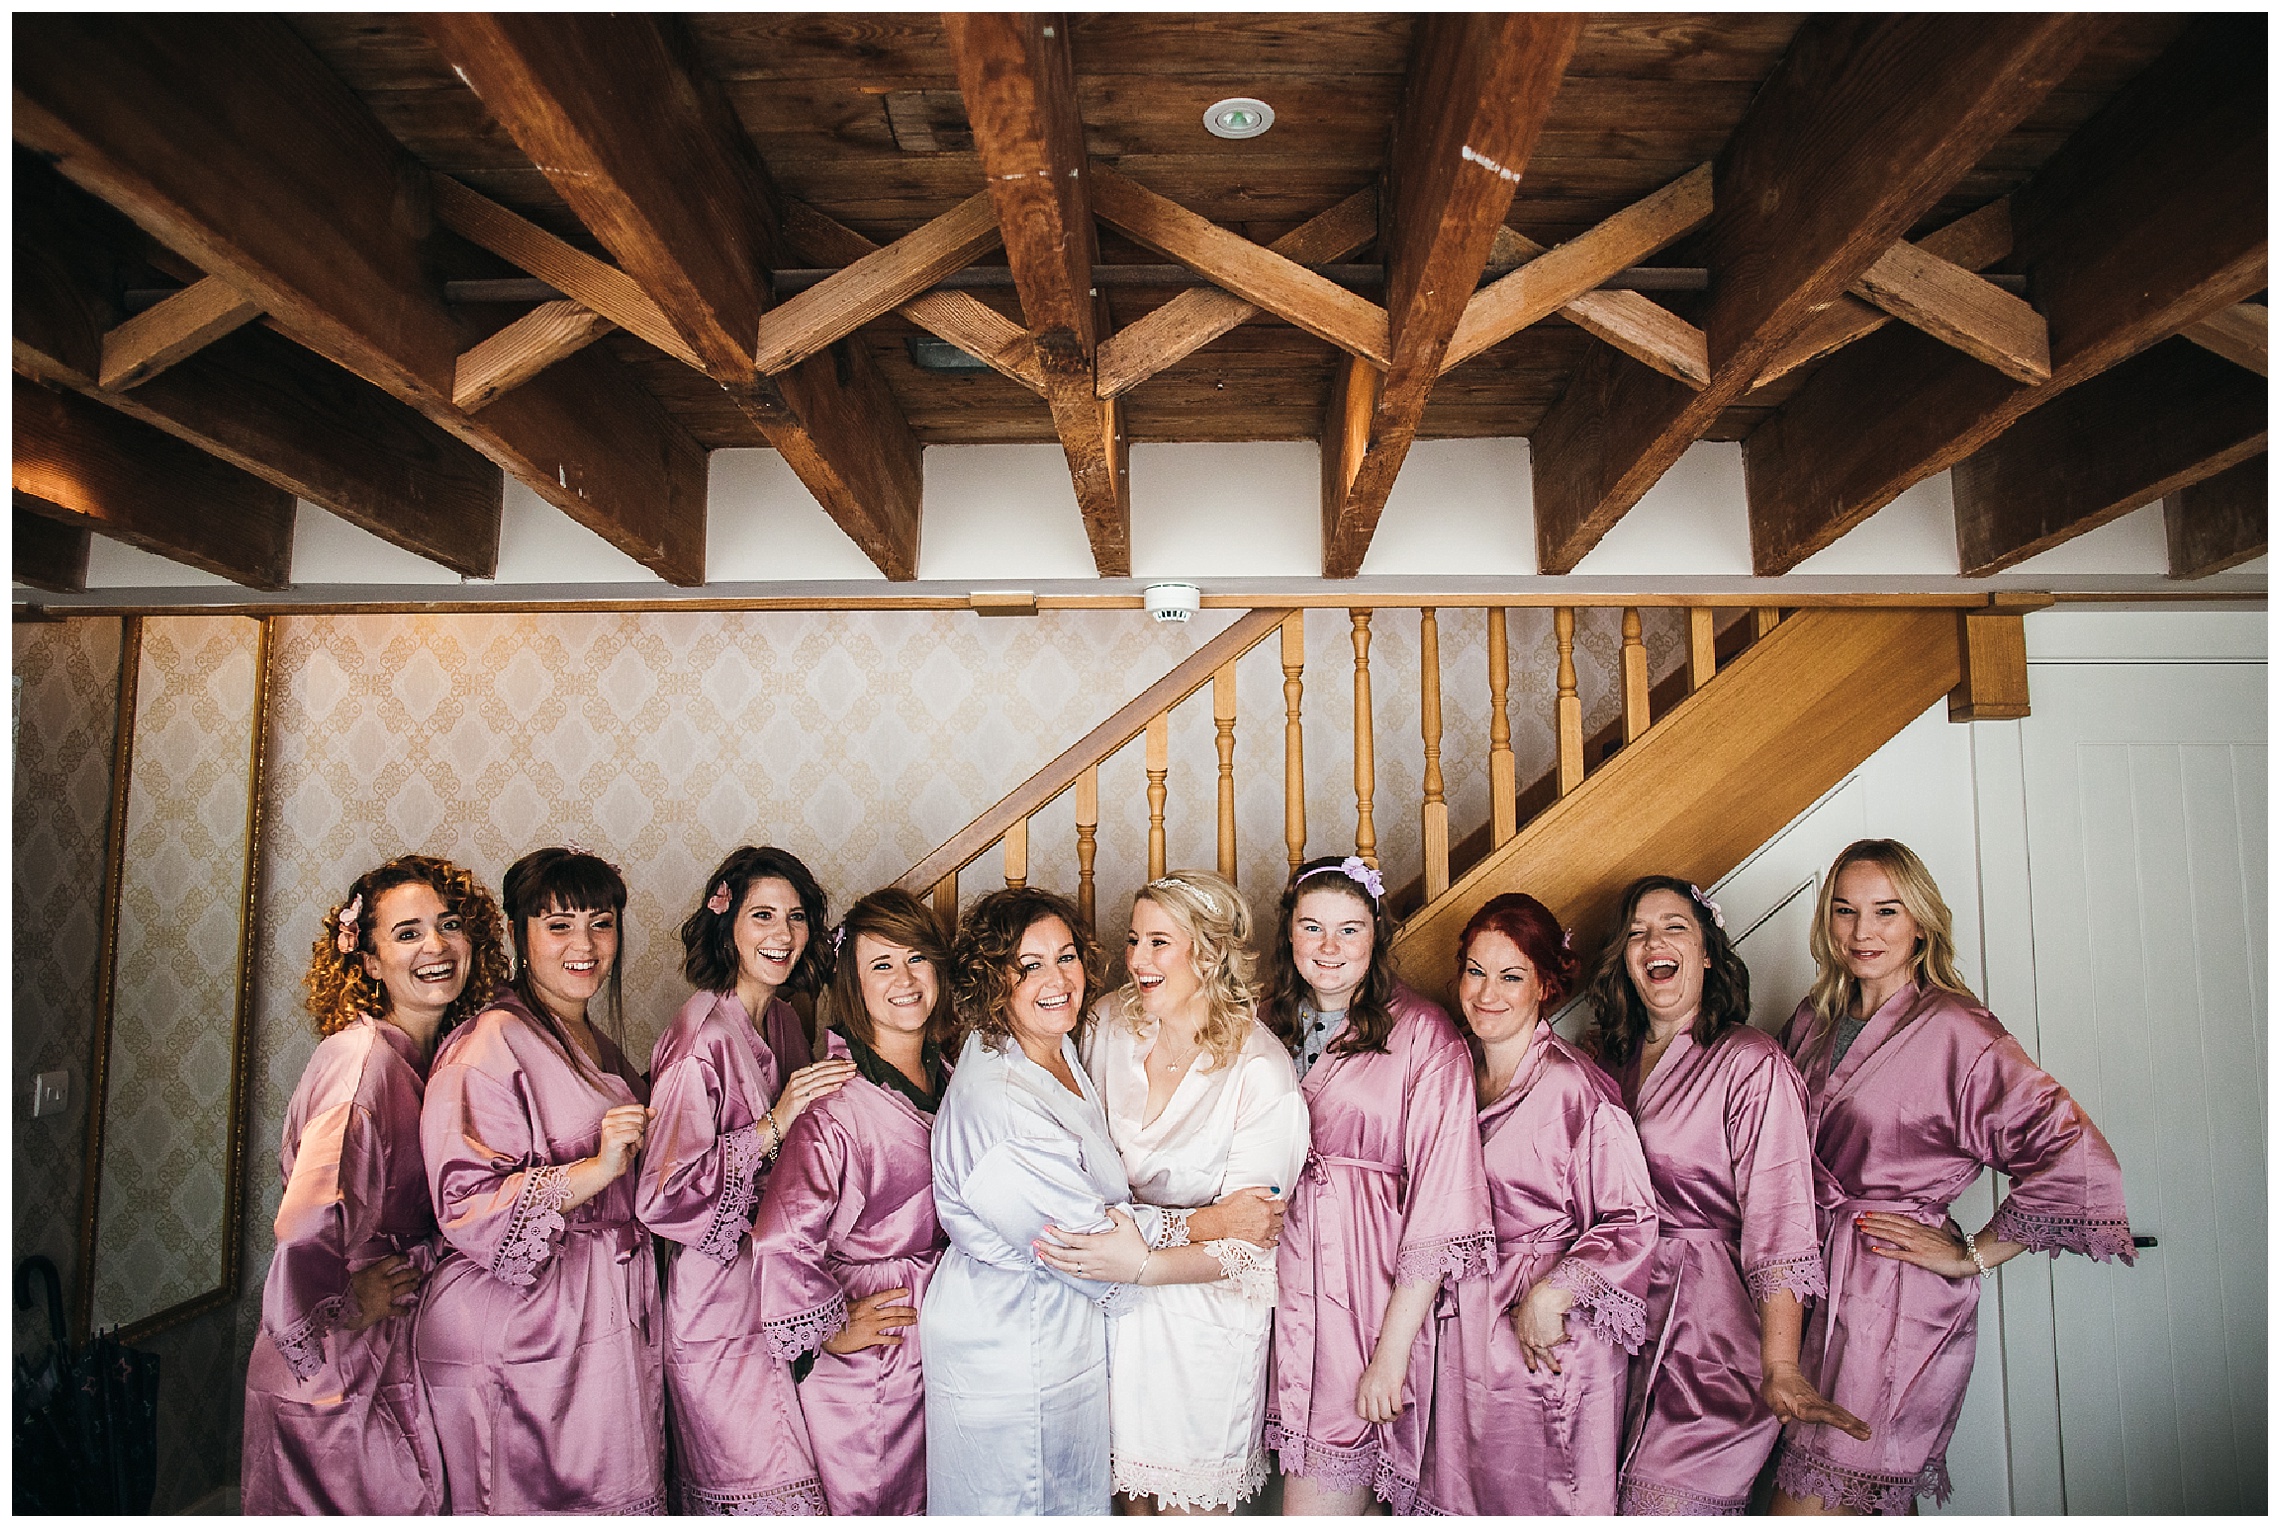 Bride and bridesmaids squeeze together smiling in dressing gowns at bassmead